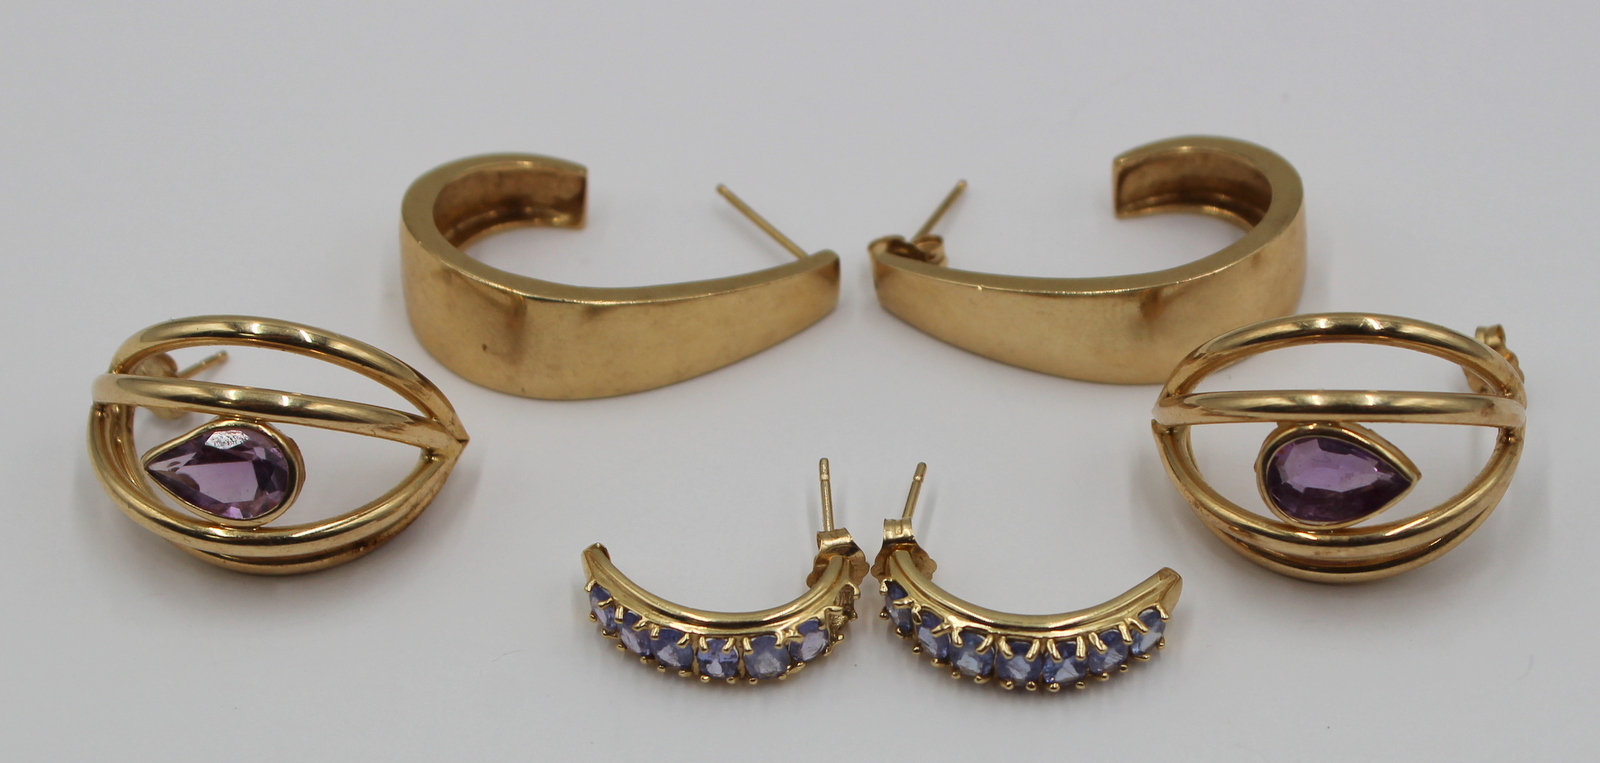 JEWELRY 3 PAIR OF 14KT GOLD 3bc348